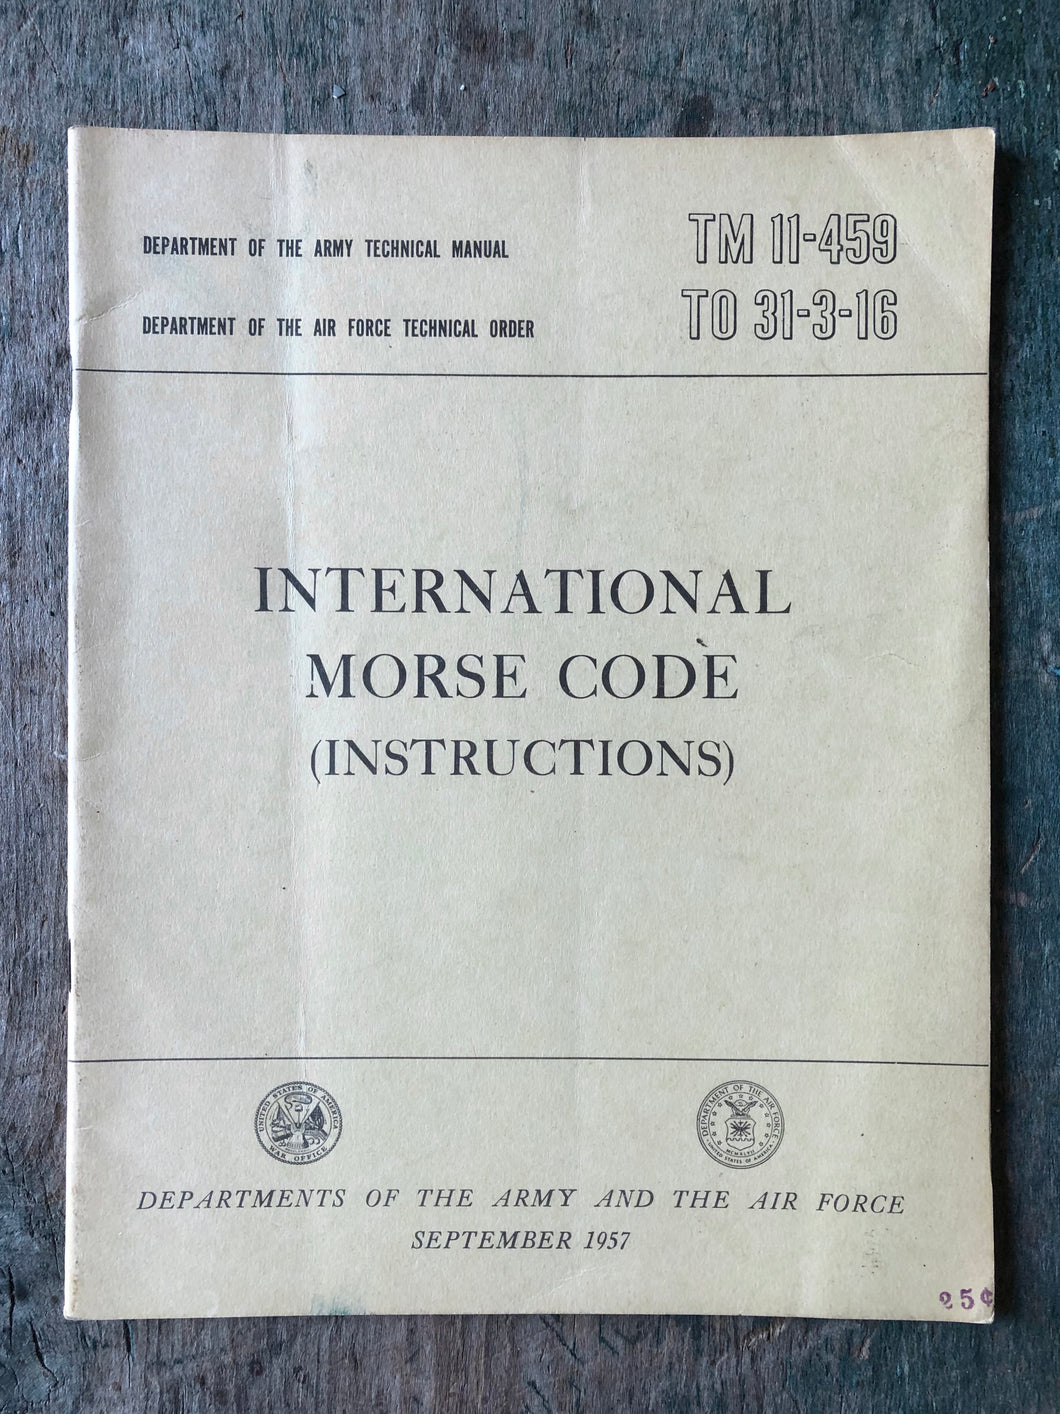 International Morse Code (Instructions). Department of the Army Technical Manual. Department of the Air Force Technical Order. TM 11-459, TO 31-3-16